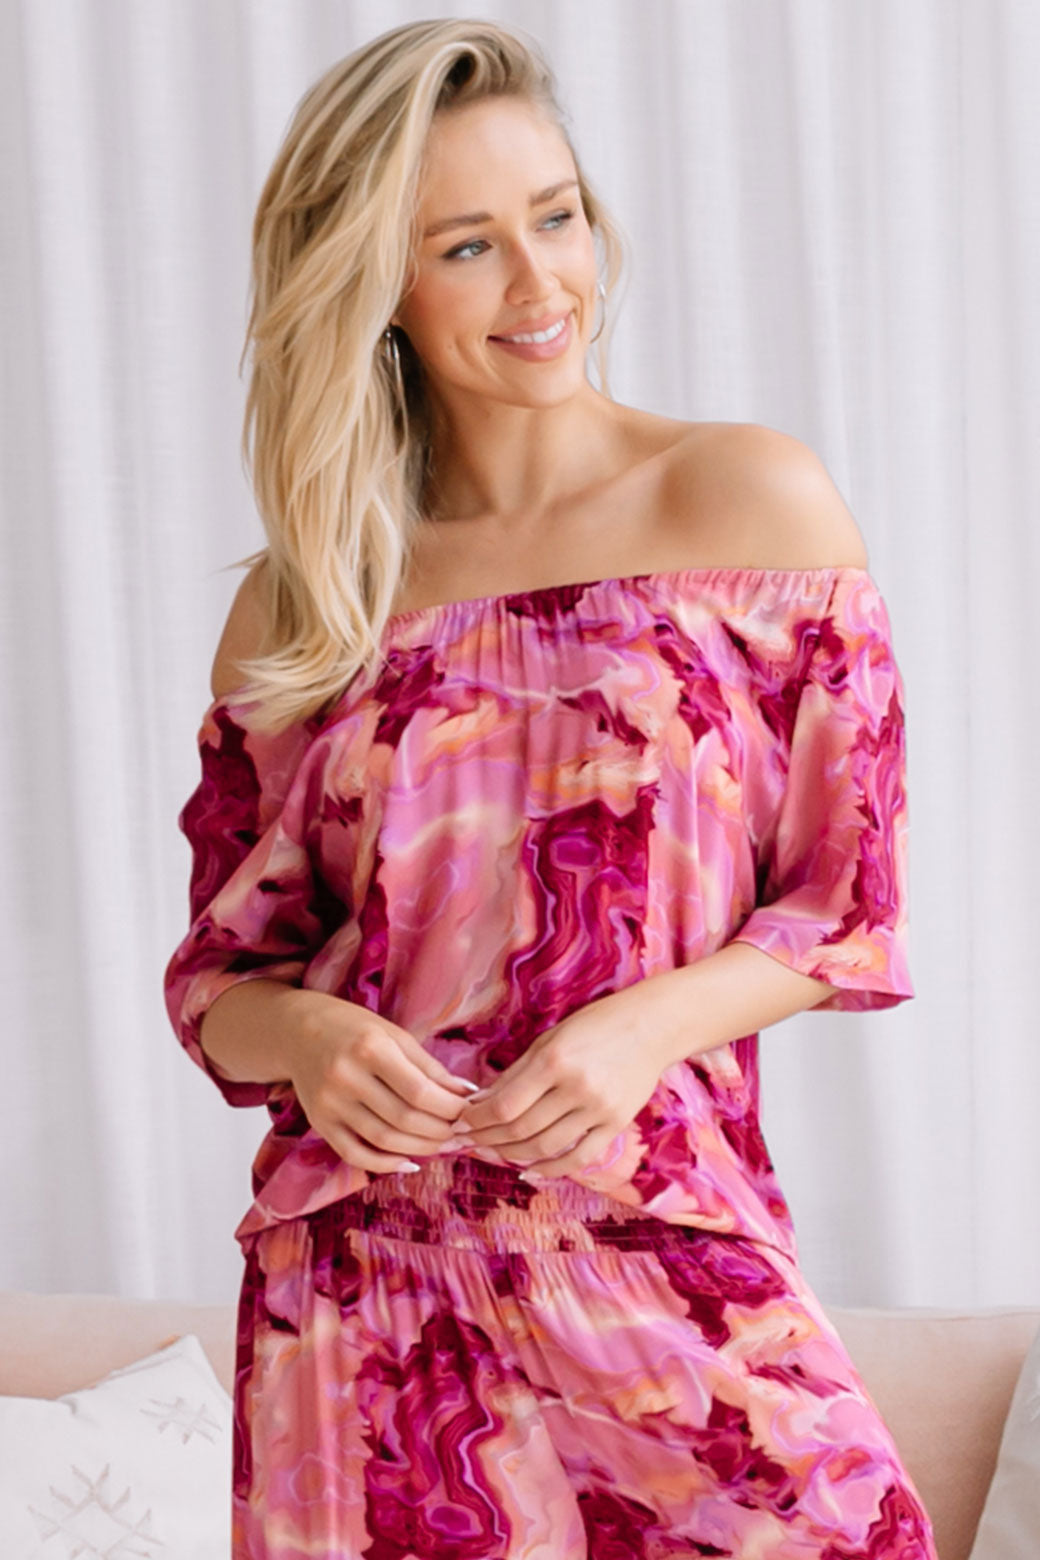 Remy-Off-Shoulder-Top-Berry-Marble-Print.jpg